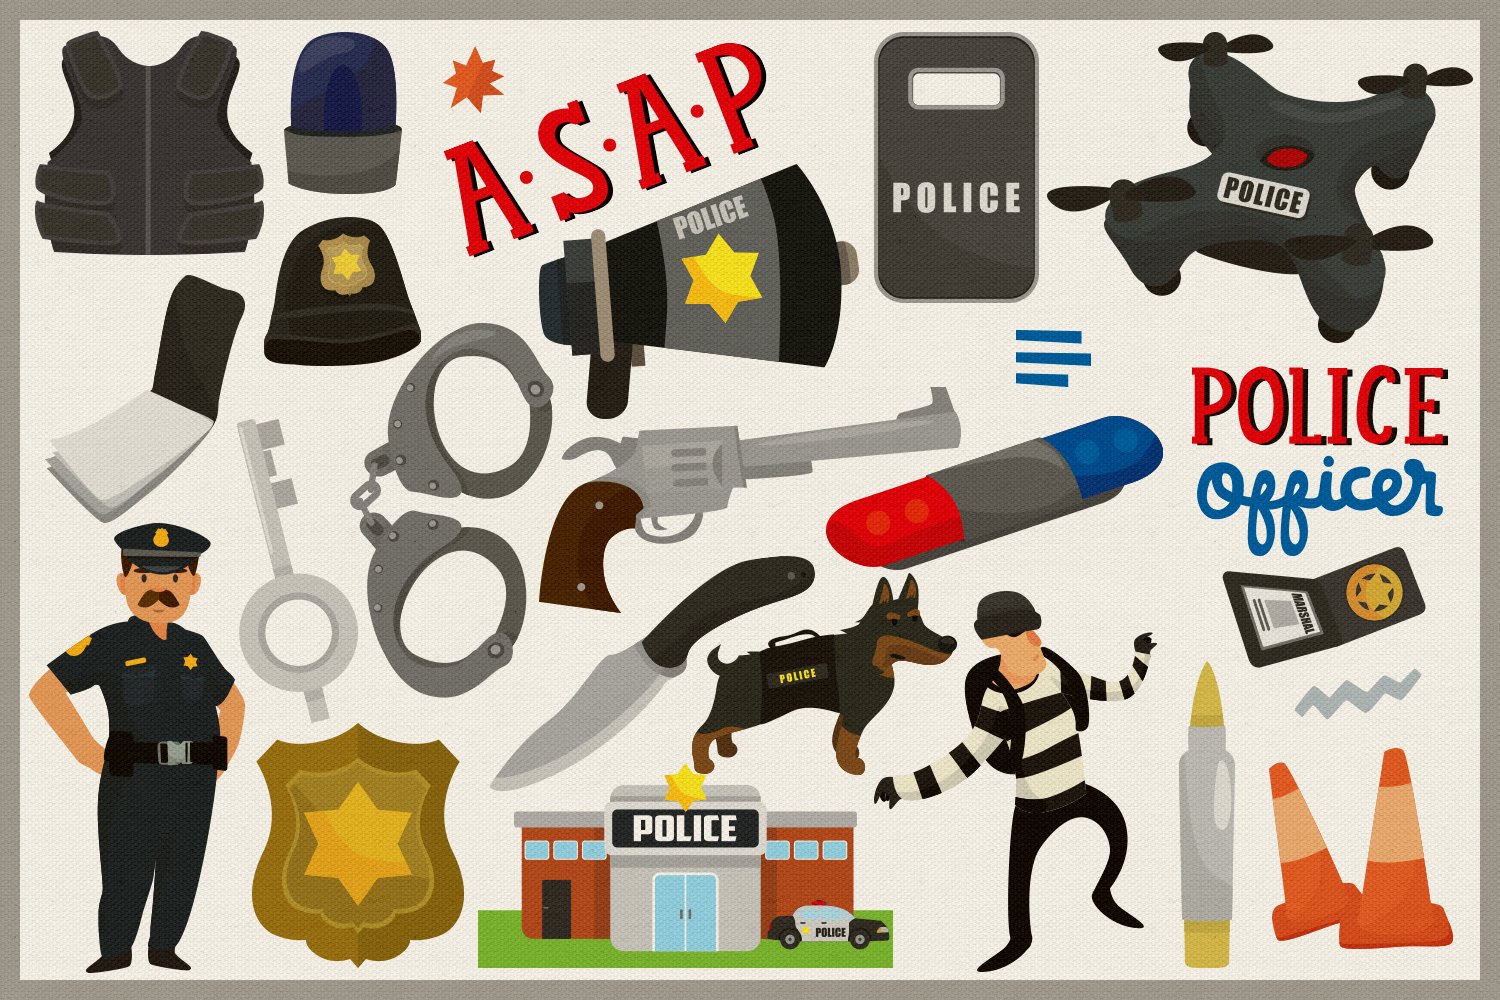 Images of policeman, thief, police station, police dog, signaling, loudspeaker, drone, wallet, body armor, key, safe, knife, handcuffs, gun, bullet and others.